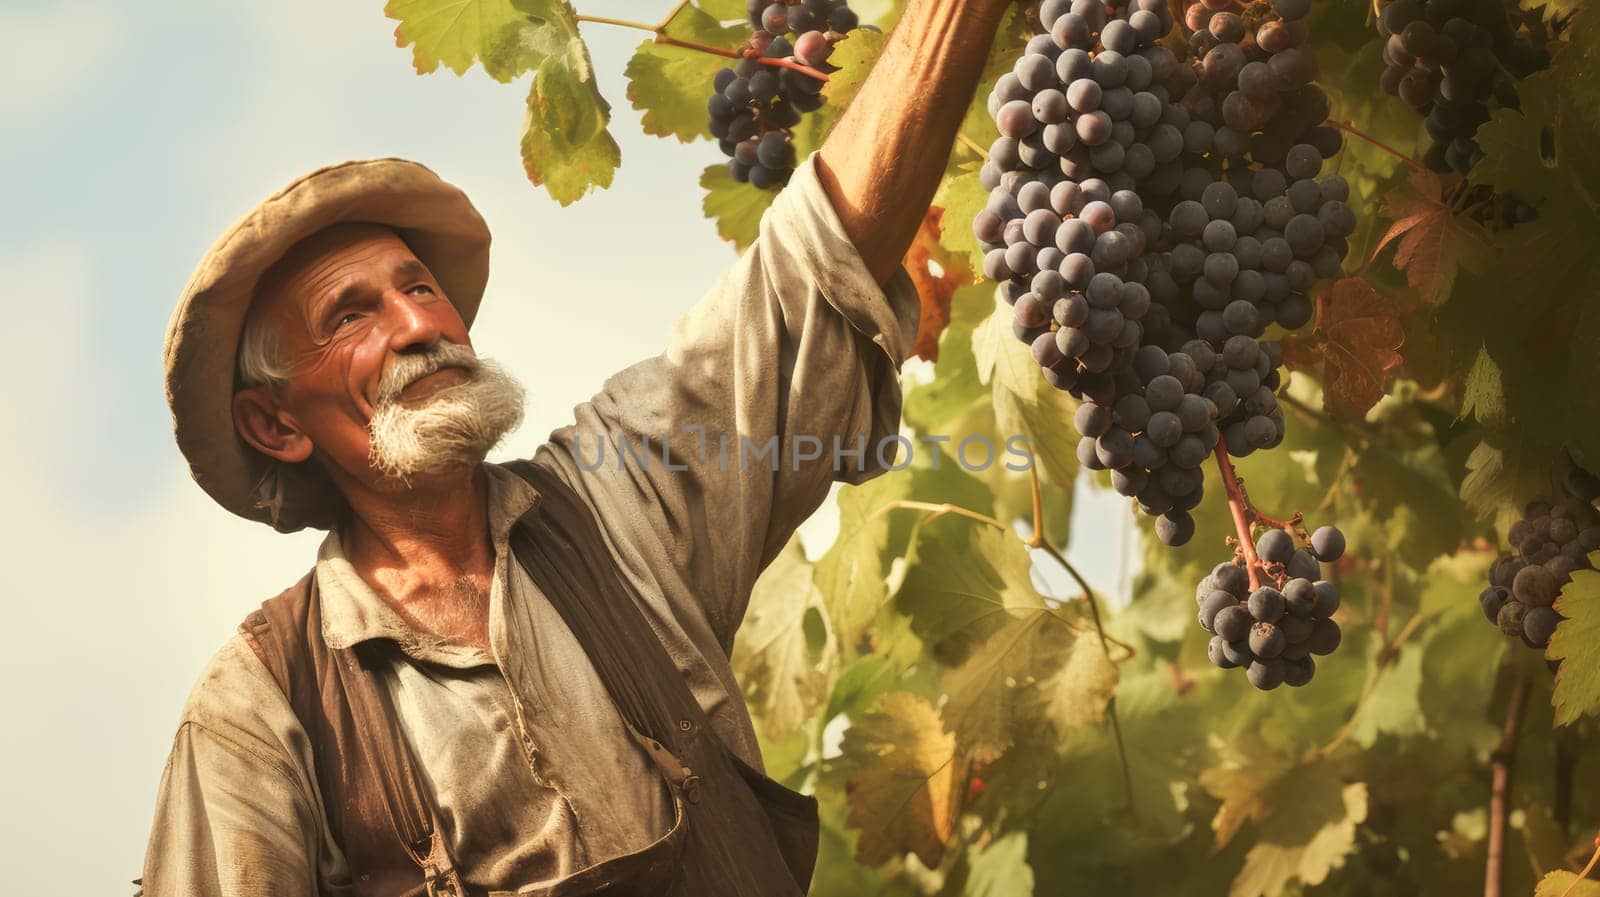 Man picking grapes: Manually picking blue grapes on vineyards to make wine. Wine making, vineyards, tourism business, small and private business, chain restaurant, flavorful food and drinks